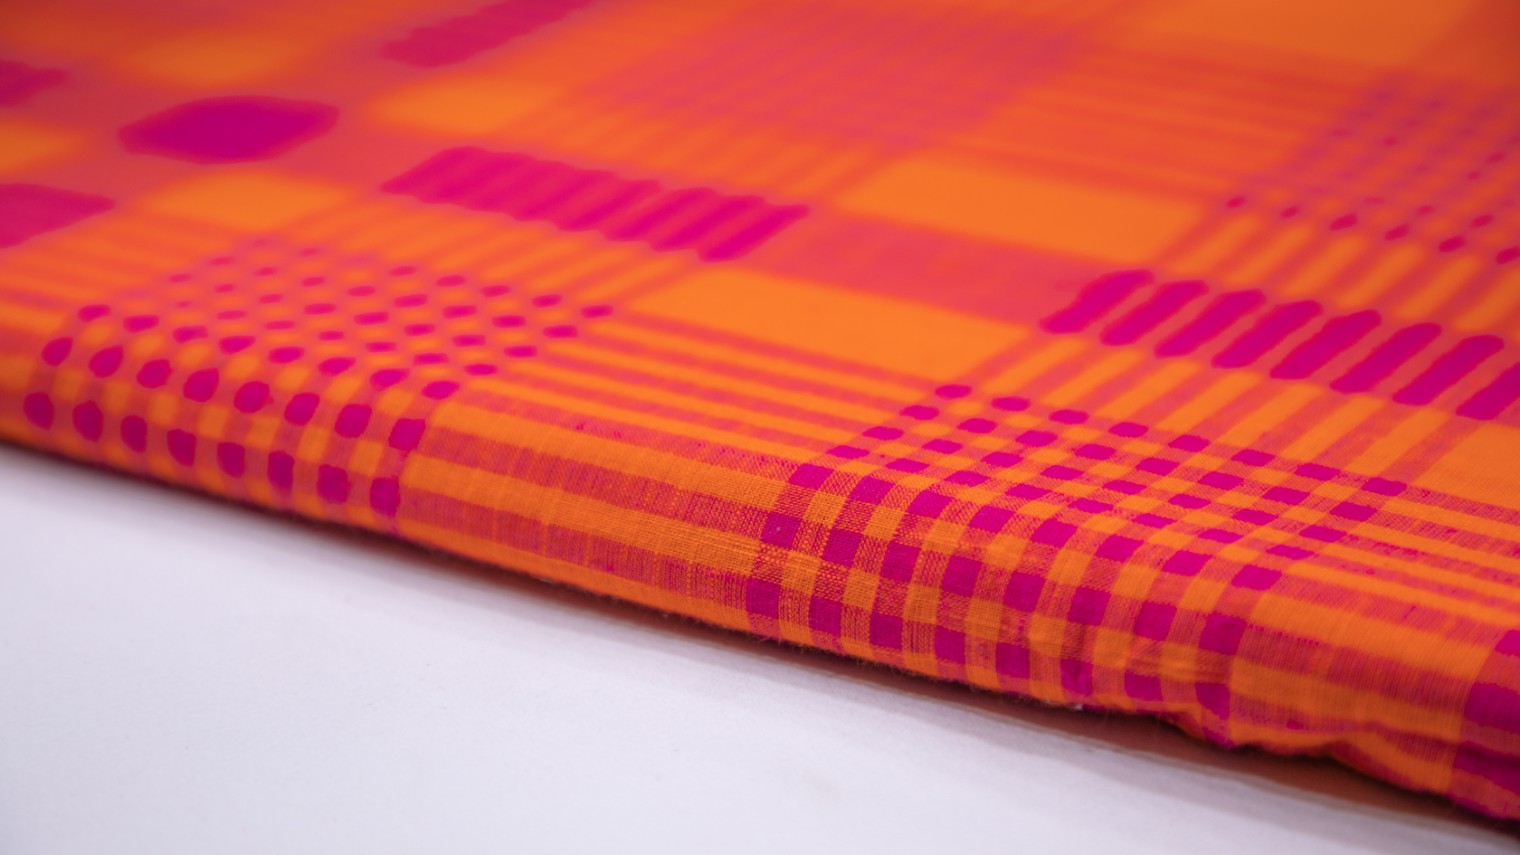 Bright Orange Color South Cotton Handloom Pink Chex Weave Fabric - 4268